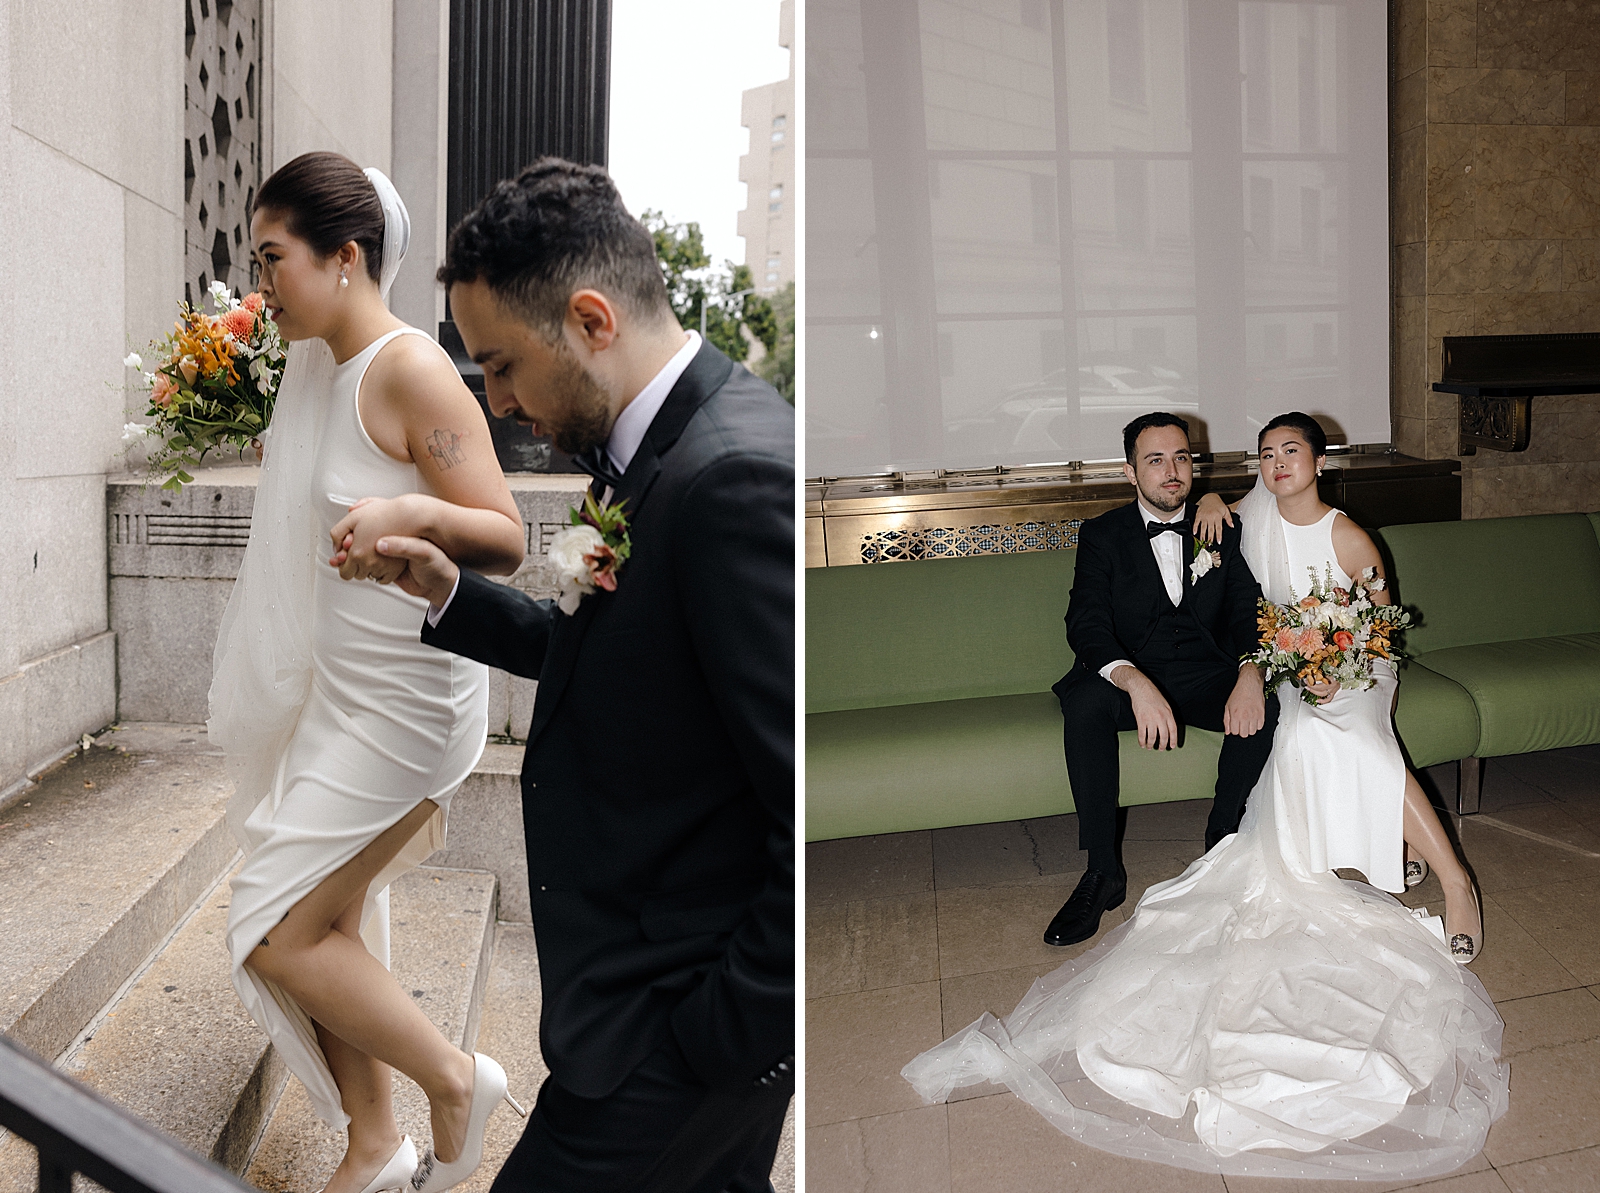 Left photo: Shot of the bride and groom with clasped hands as they walk up steps. 
RIght photo: The bride and groom pose together on a green couch. 